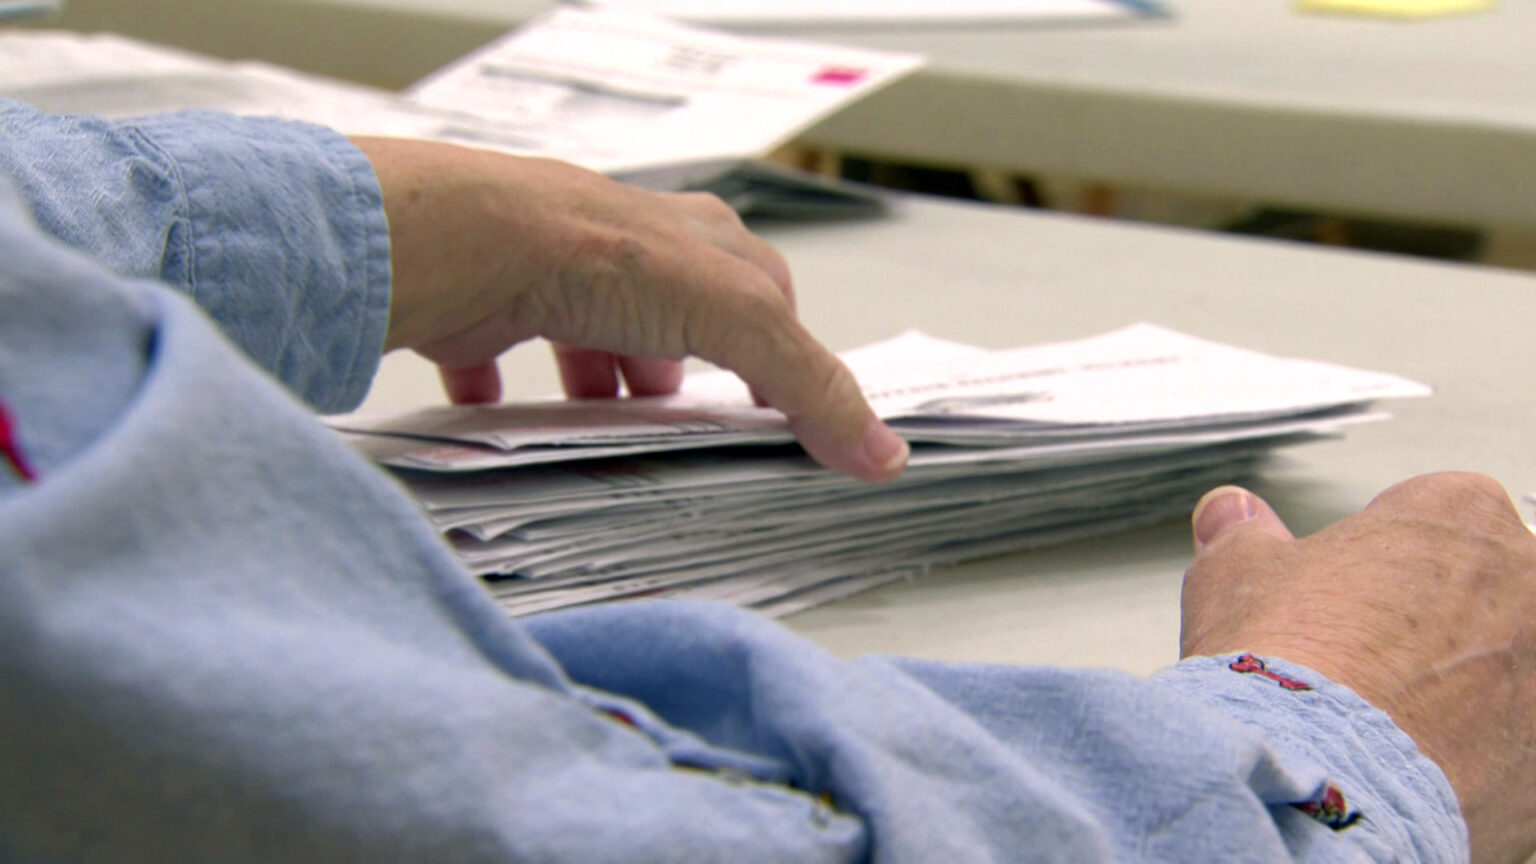 A poll worker's right hand sits on a the surface of a table while their left hand holds a stack of envelopes.